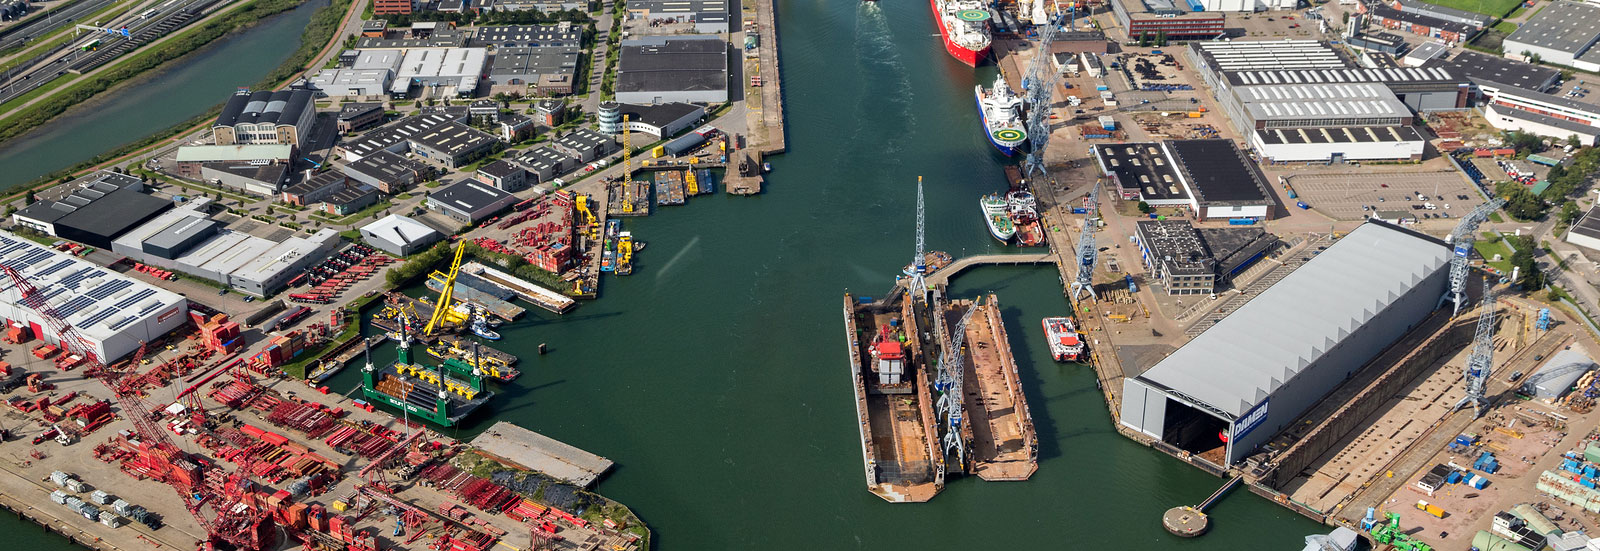 An aerial photo of the port of Rotterdam